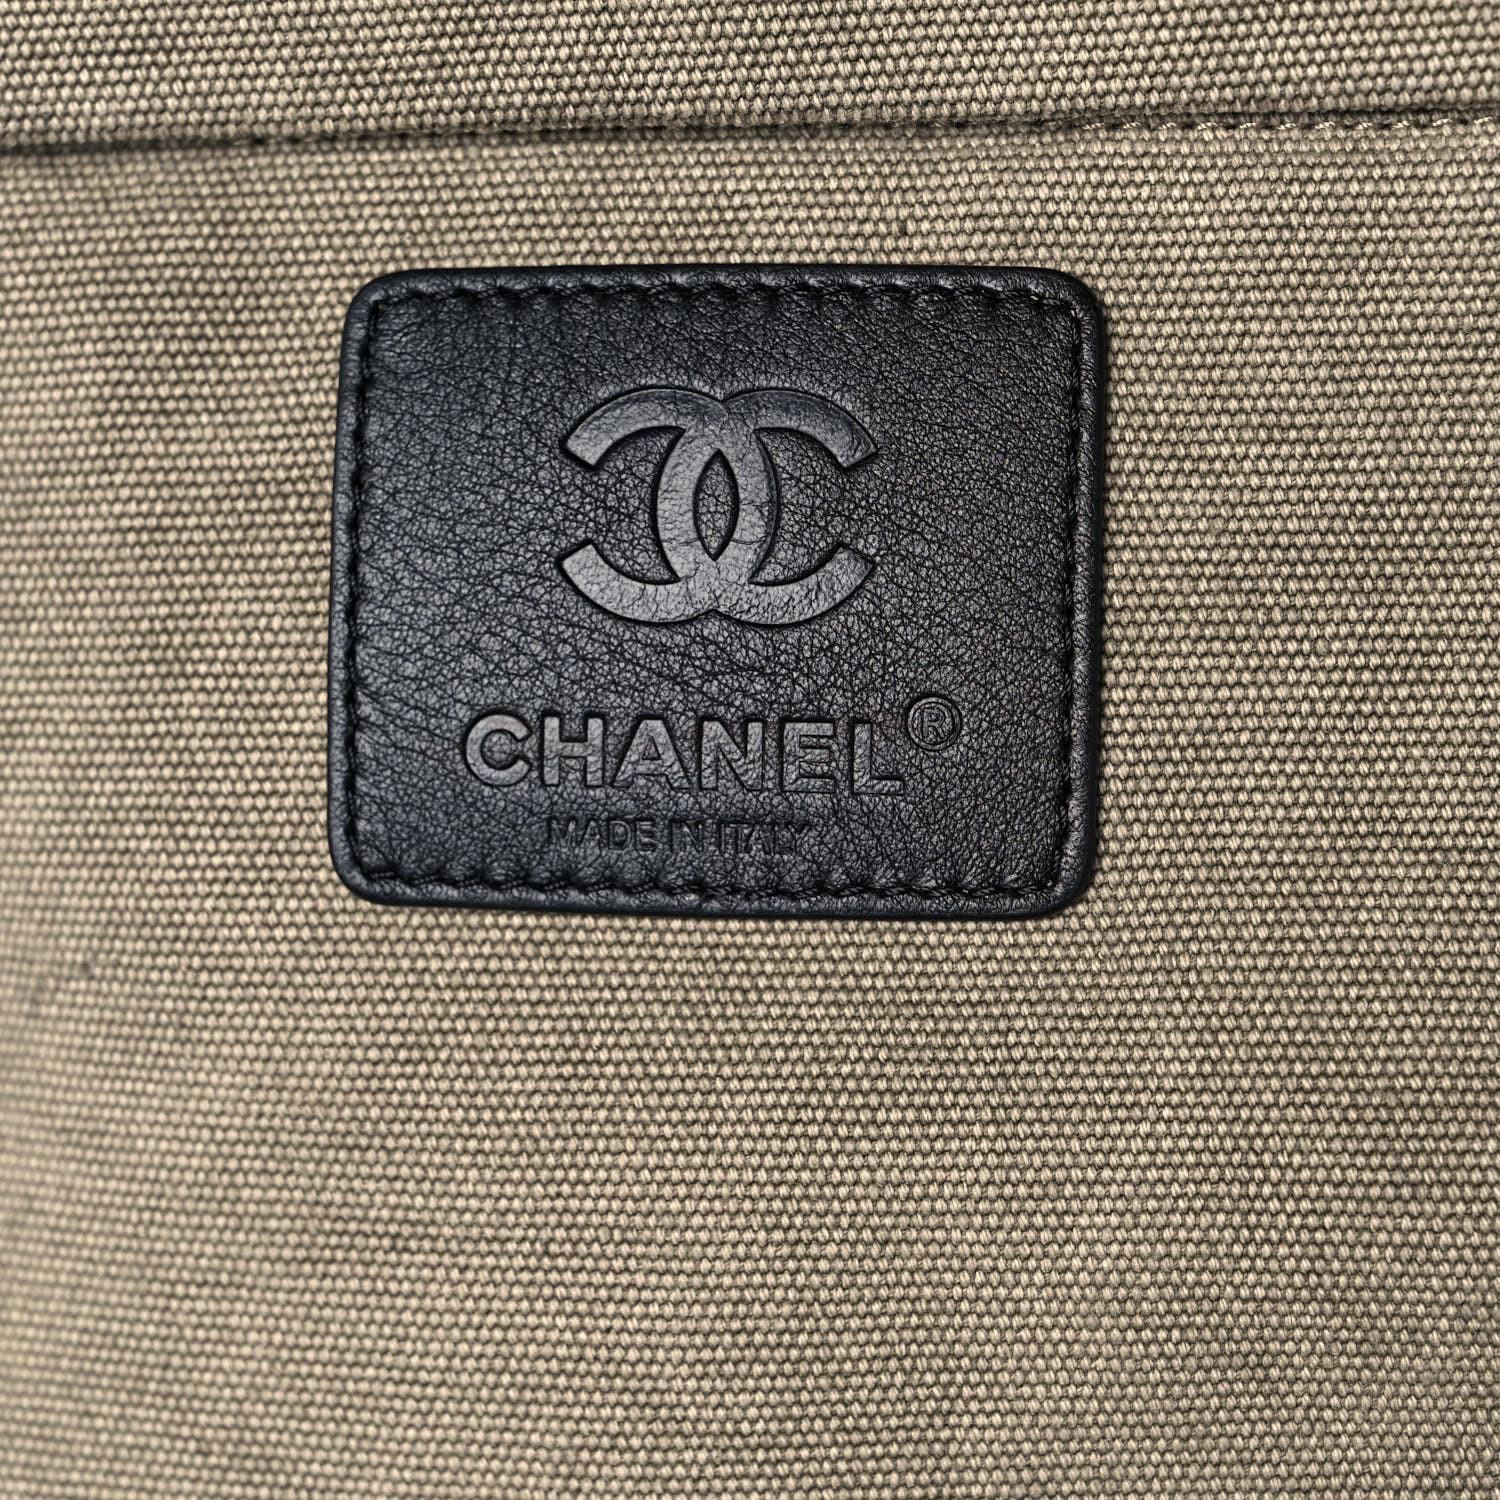 Chanel 2016 Coco Cocoon Carry Suitcase On Trolley Travel Beige Luggage Bag For Sale 5